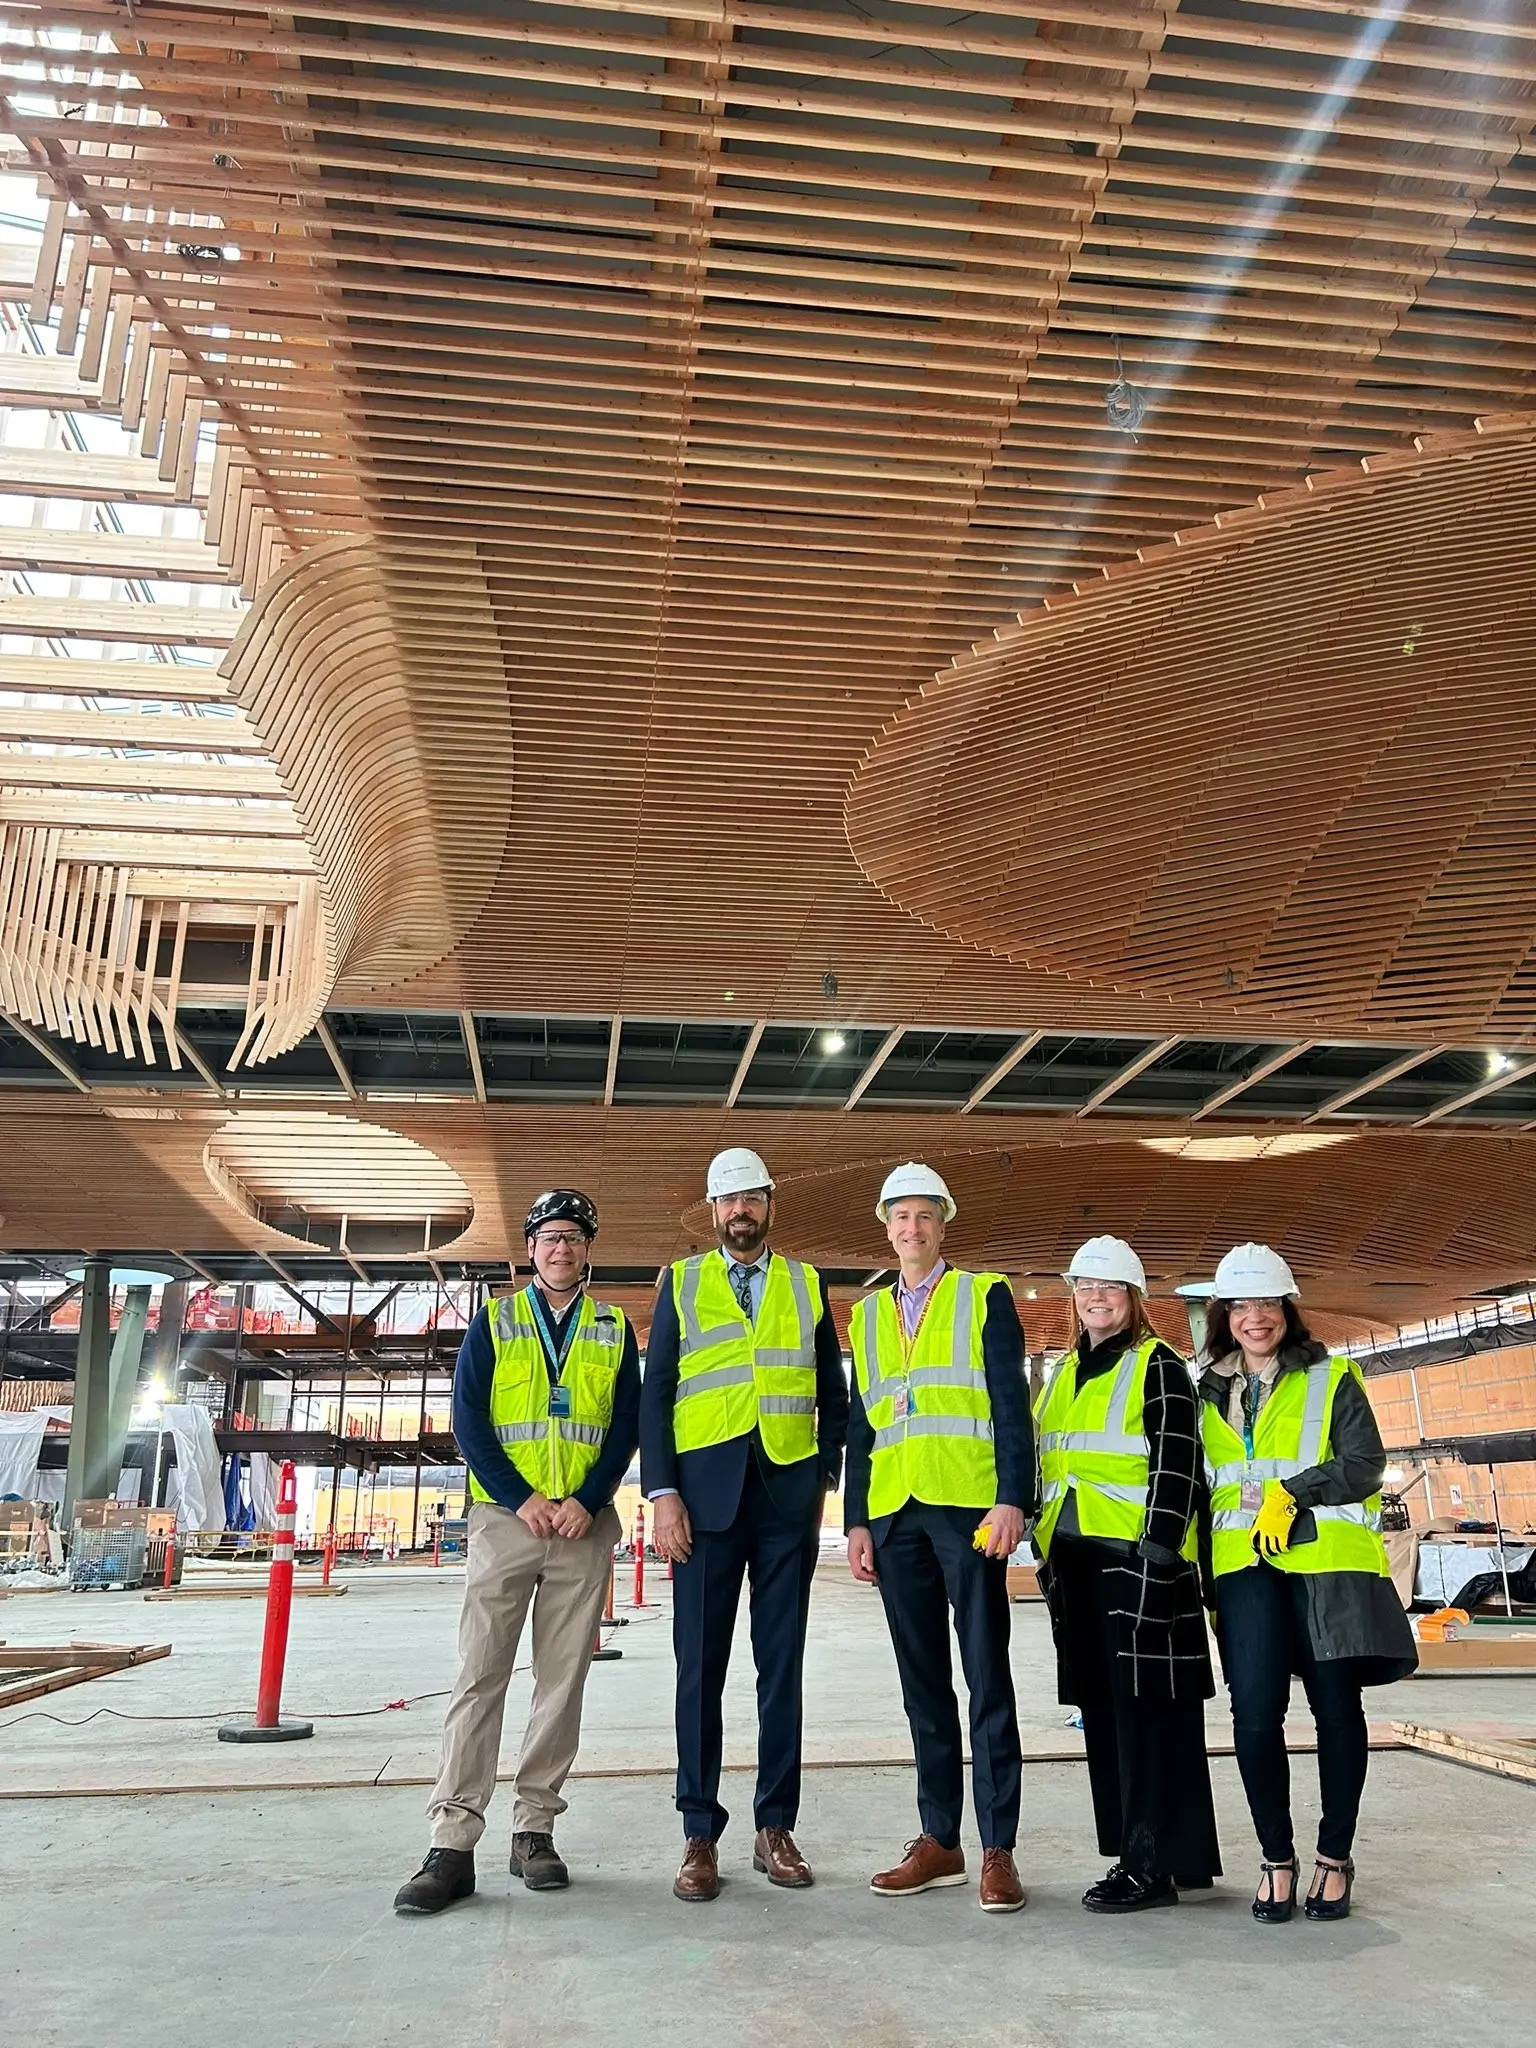 Minister Jagrup Brar is pictured with several colleagues at a new section of the Portland, OR airport that features mass timber construction